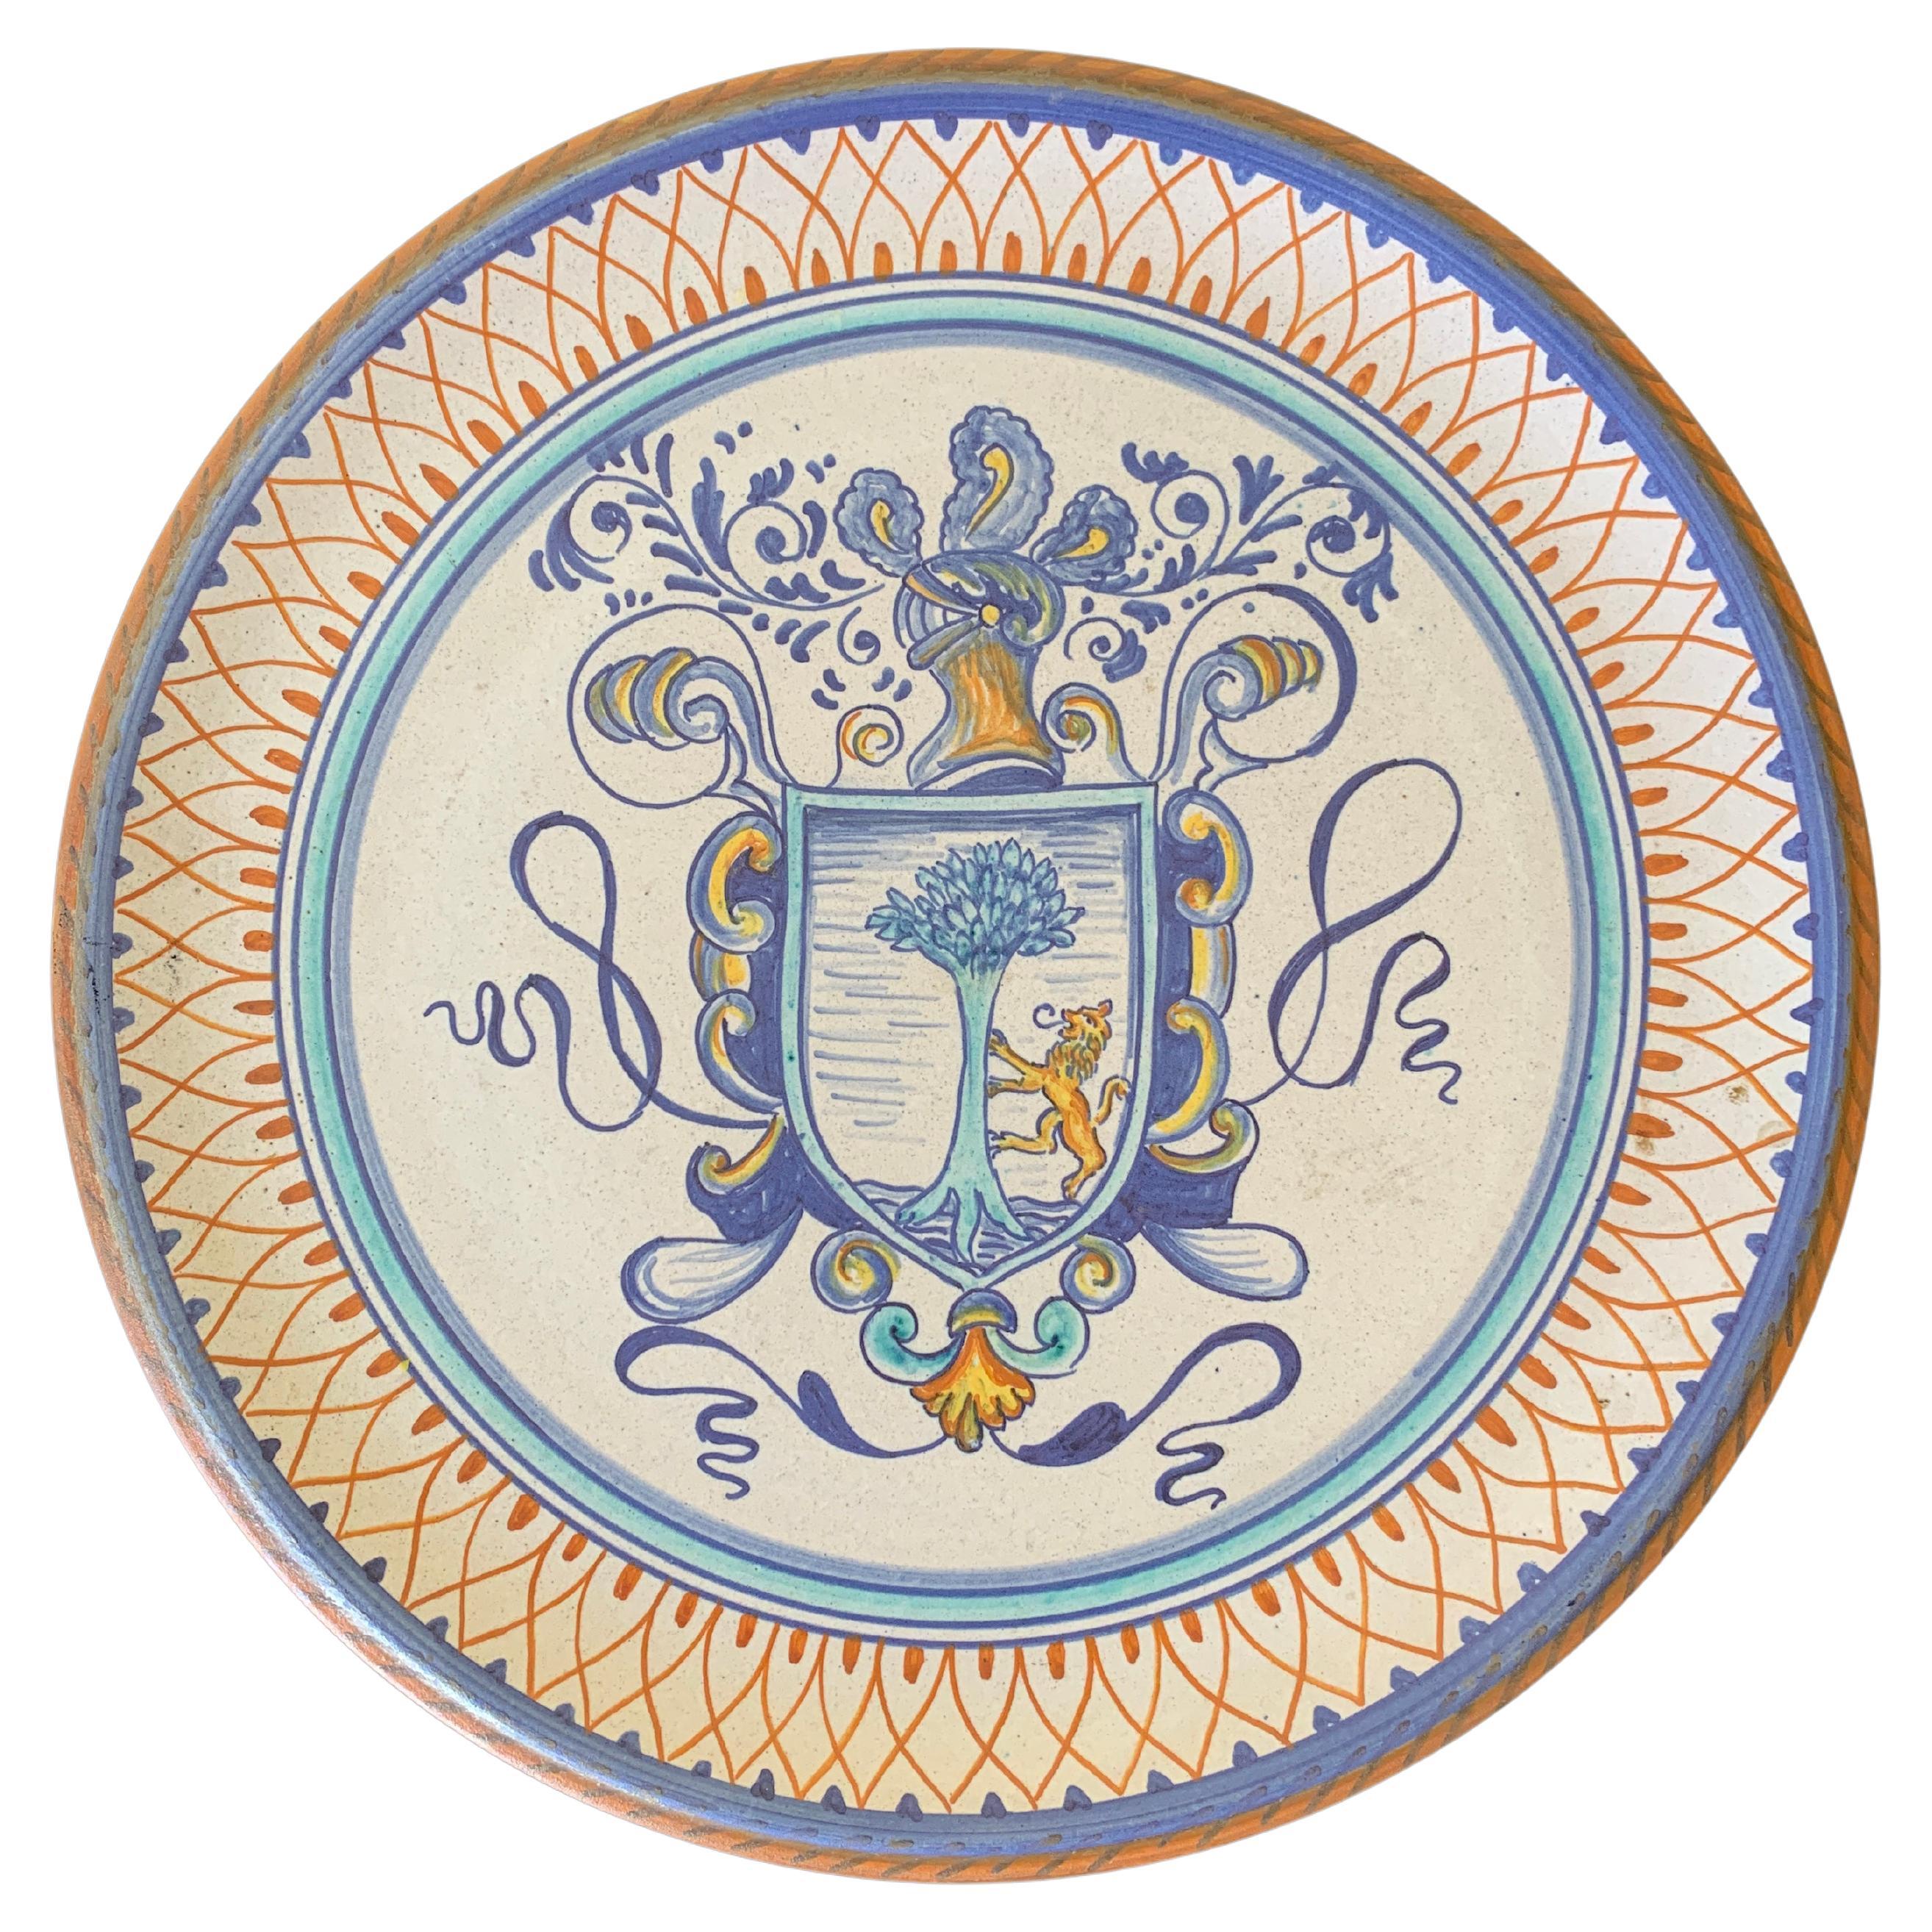 Italian Provincial Deruta Hand Painted Faience Pottery Wall Plate with Crest 